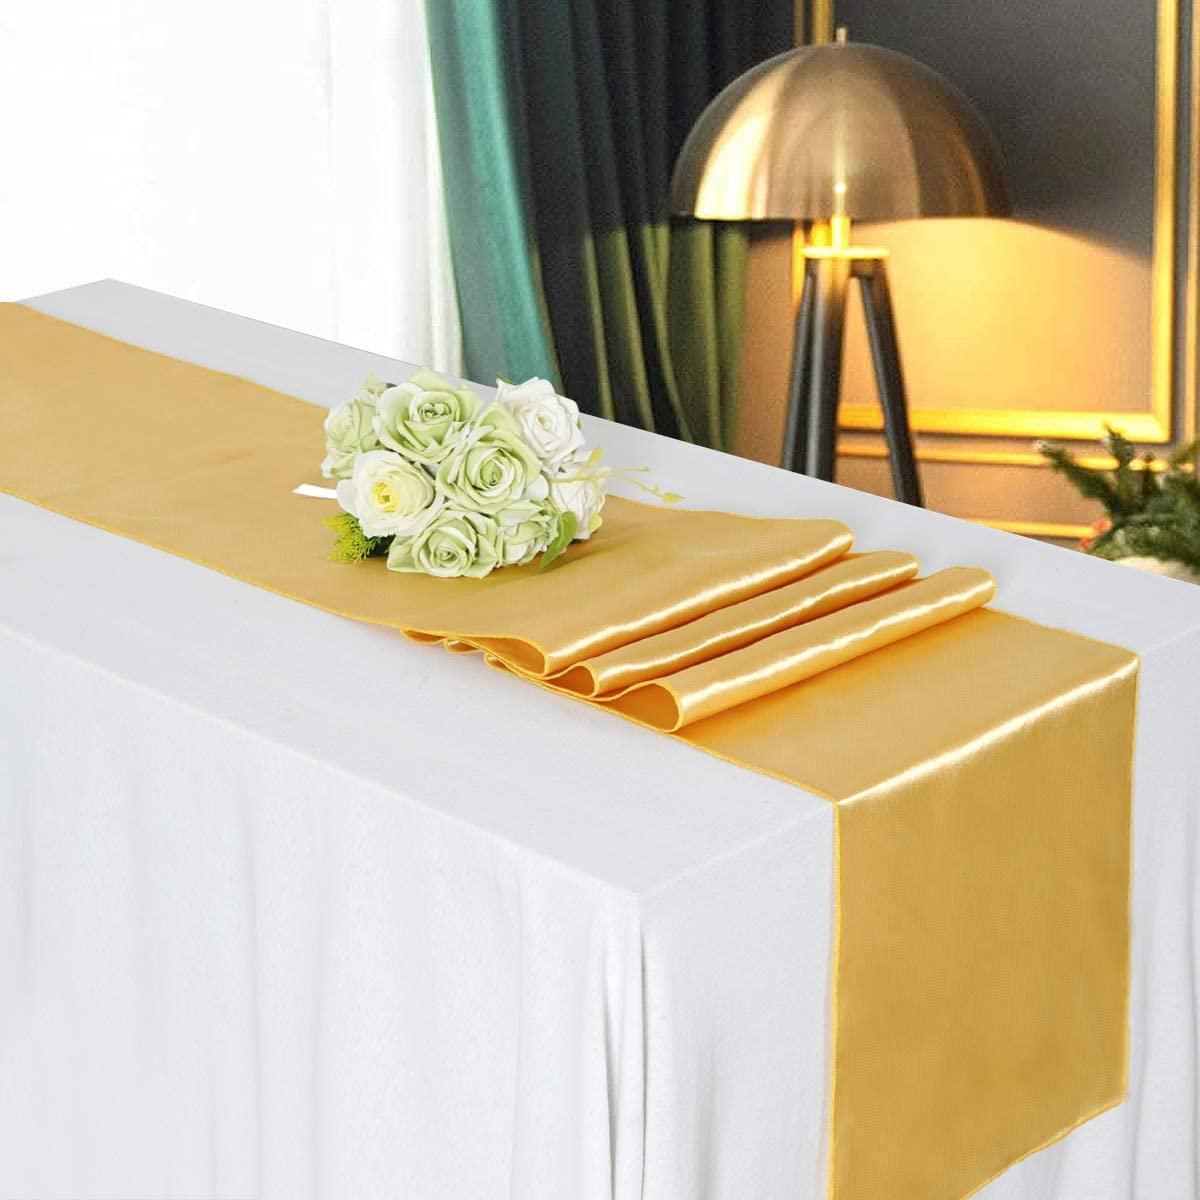 Gold Table Runners Set of 5 Satin Silky Spring Table Runner 12 x 108 inch for Wedding Party Table Decorations - Lasercutwraps Shop